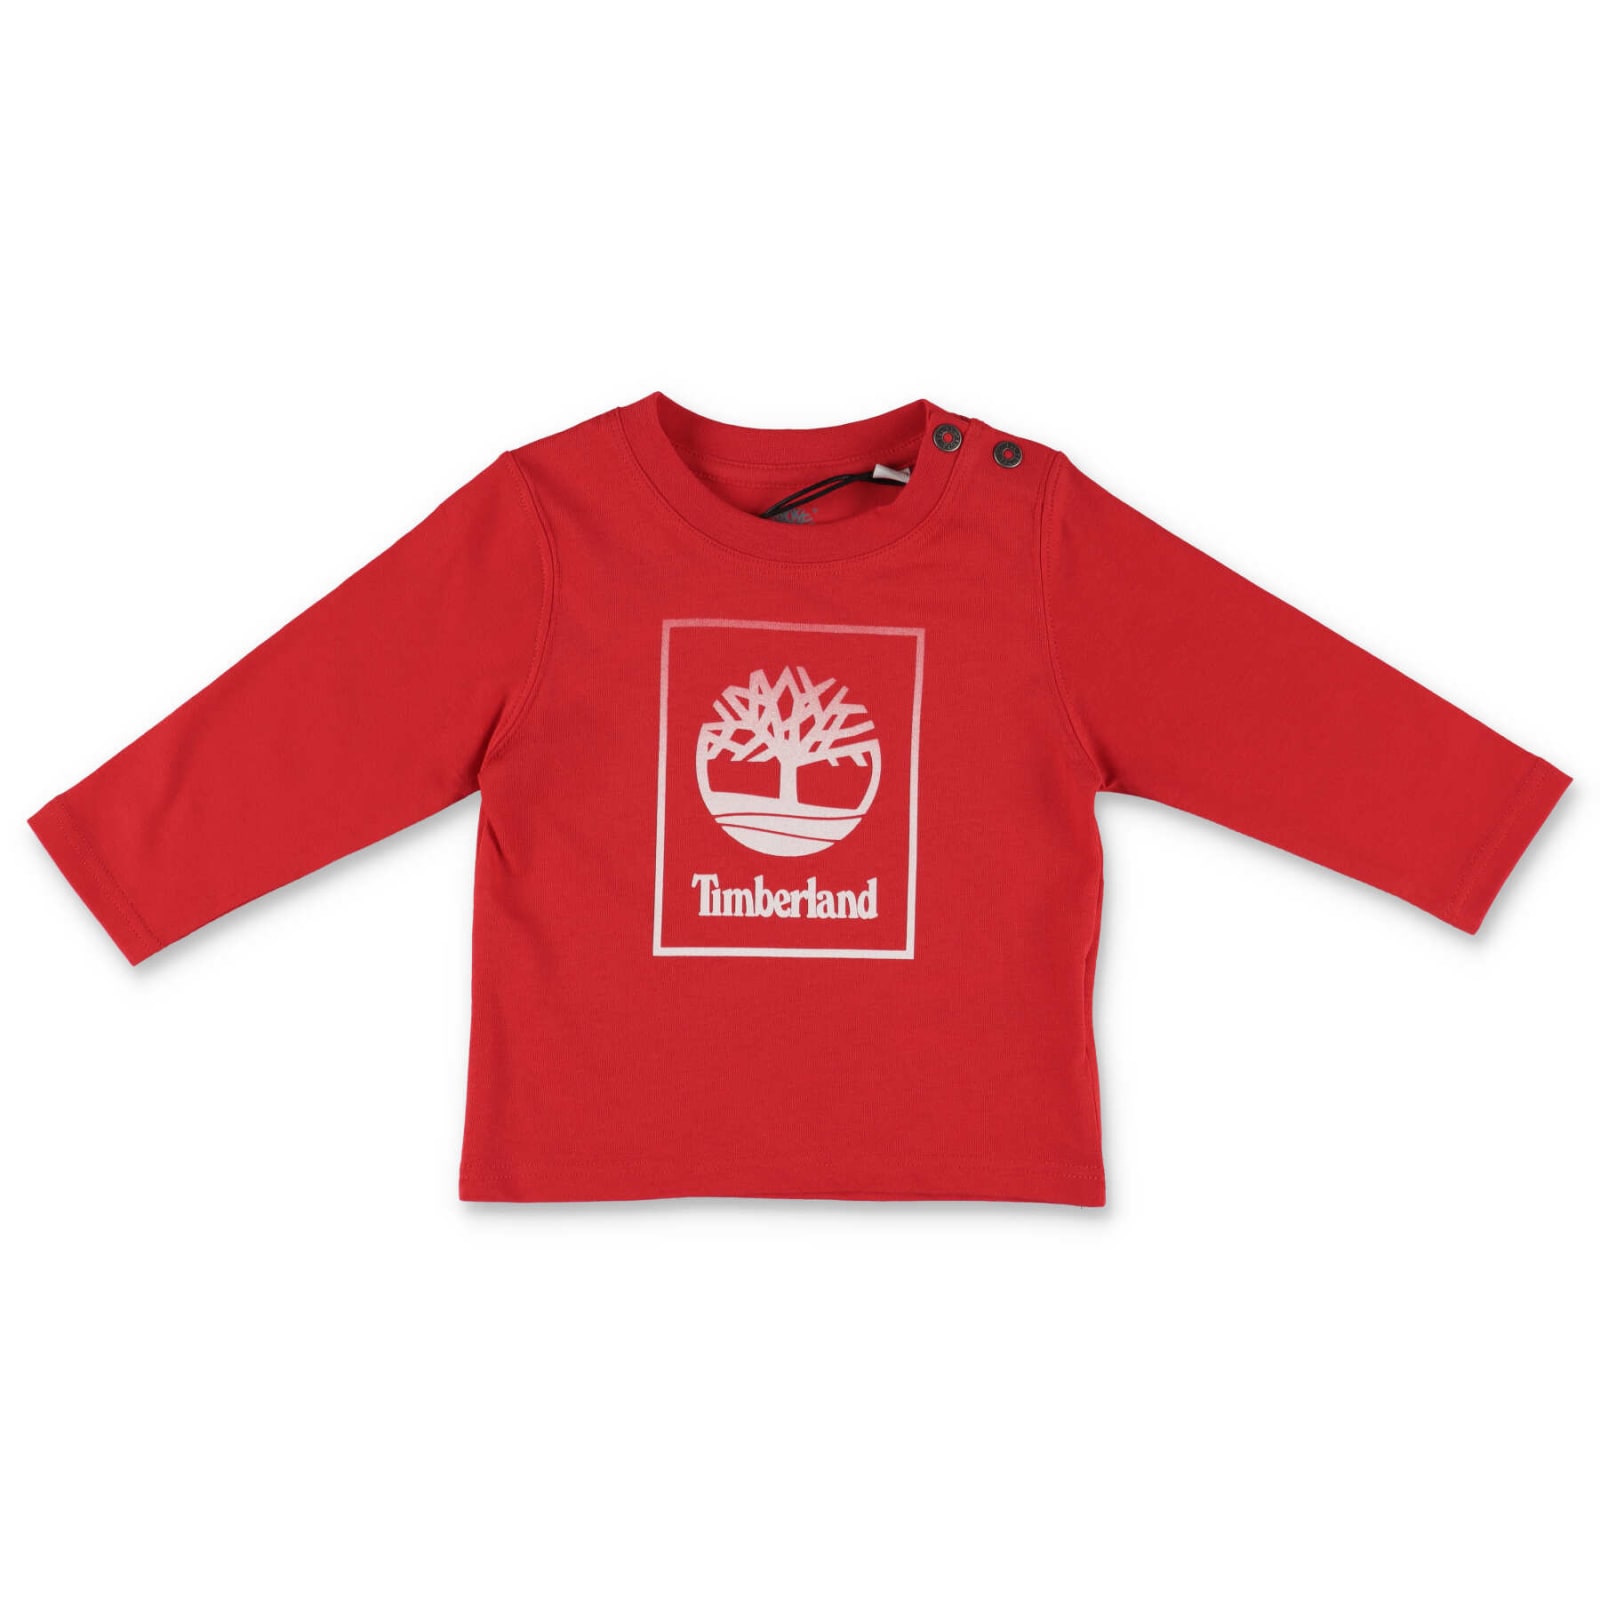 Timberland T-shirt Rossa In Jersey Di Cotone